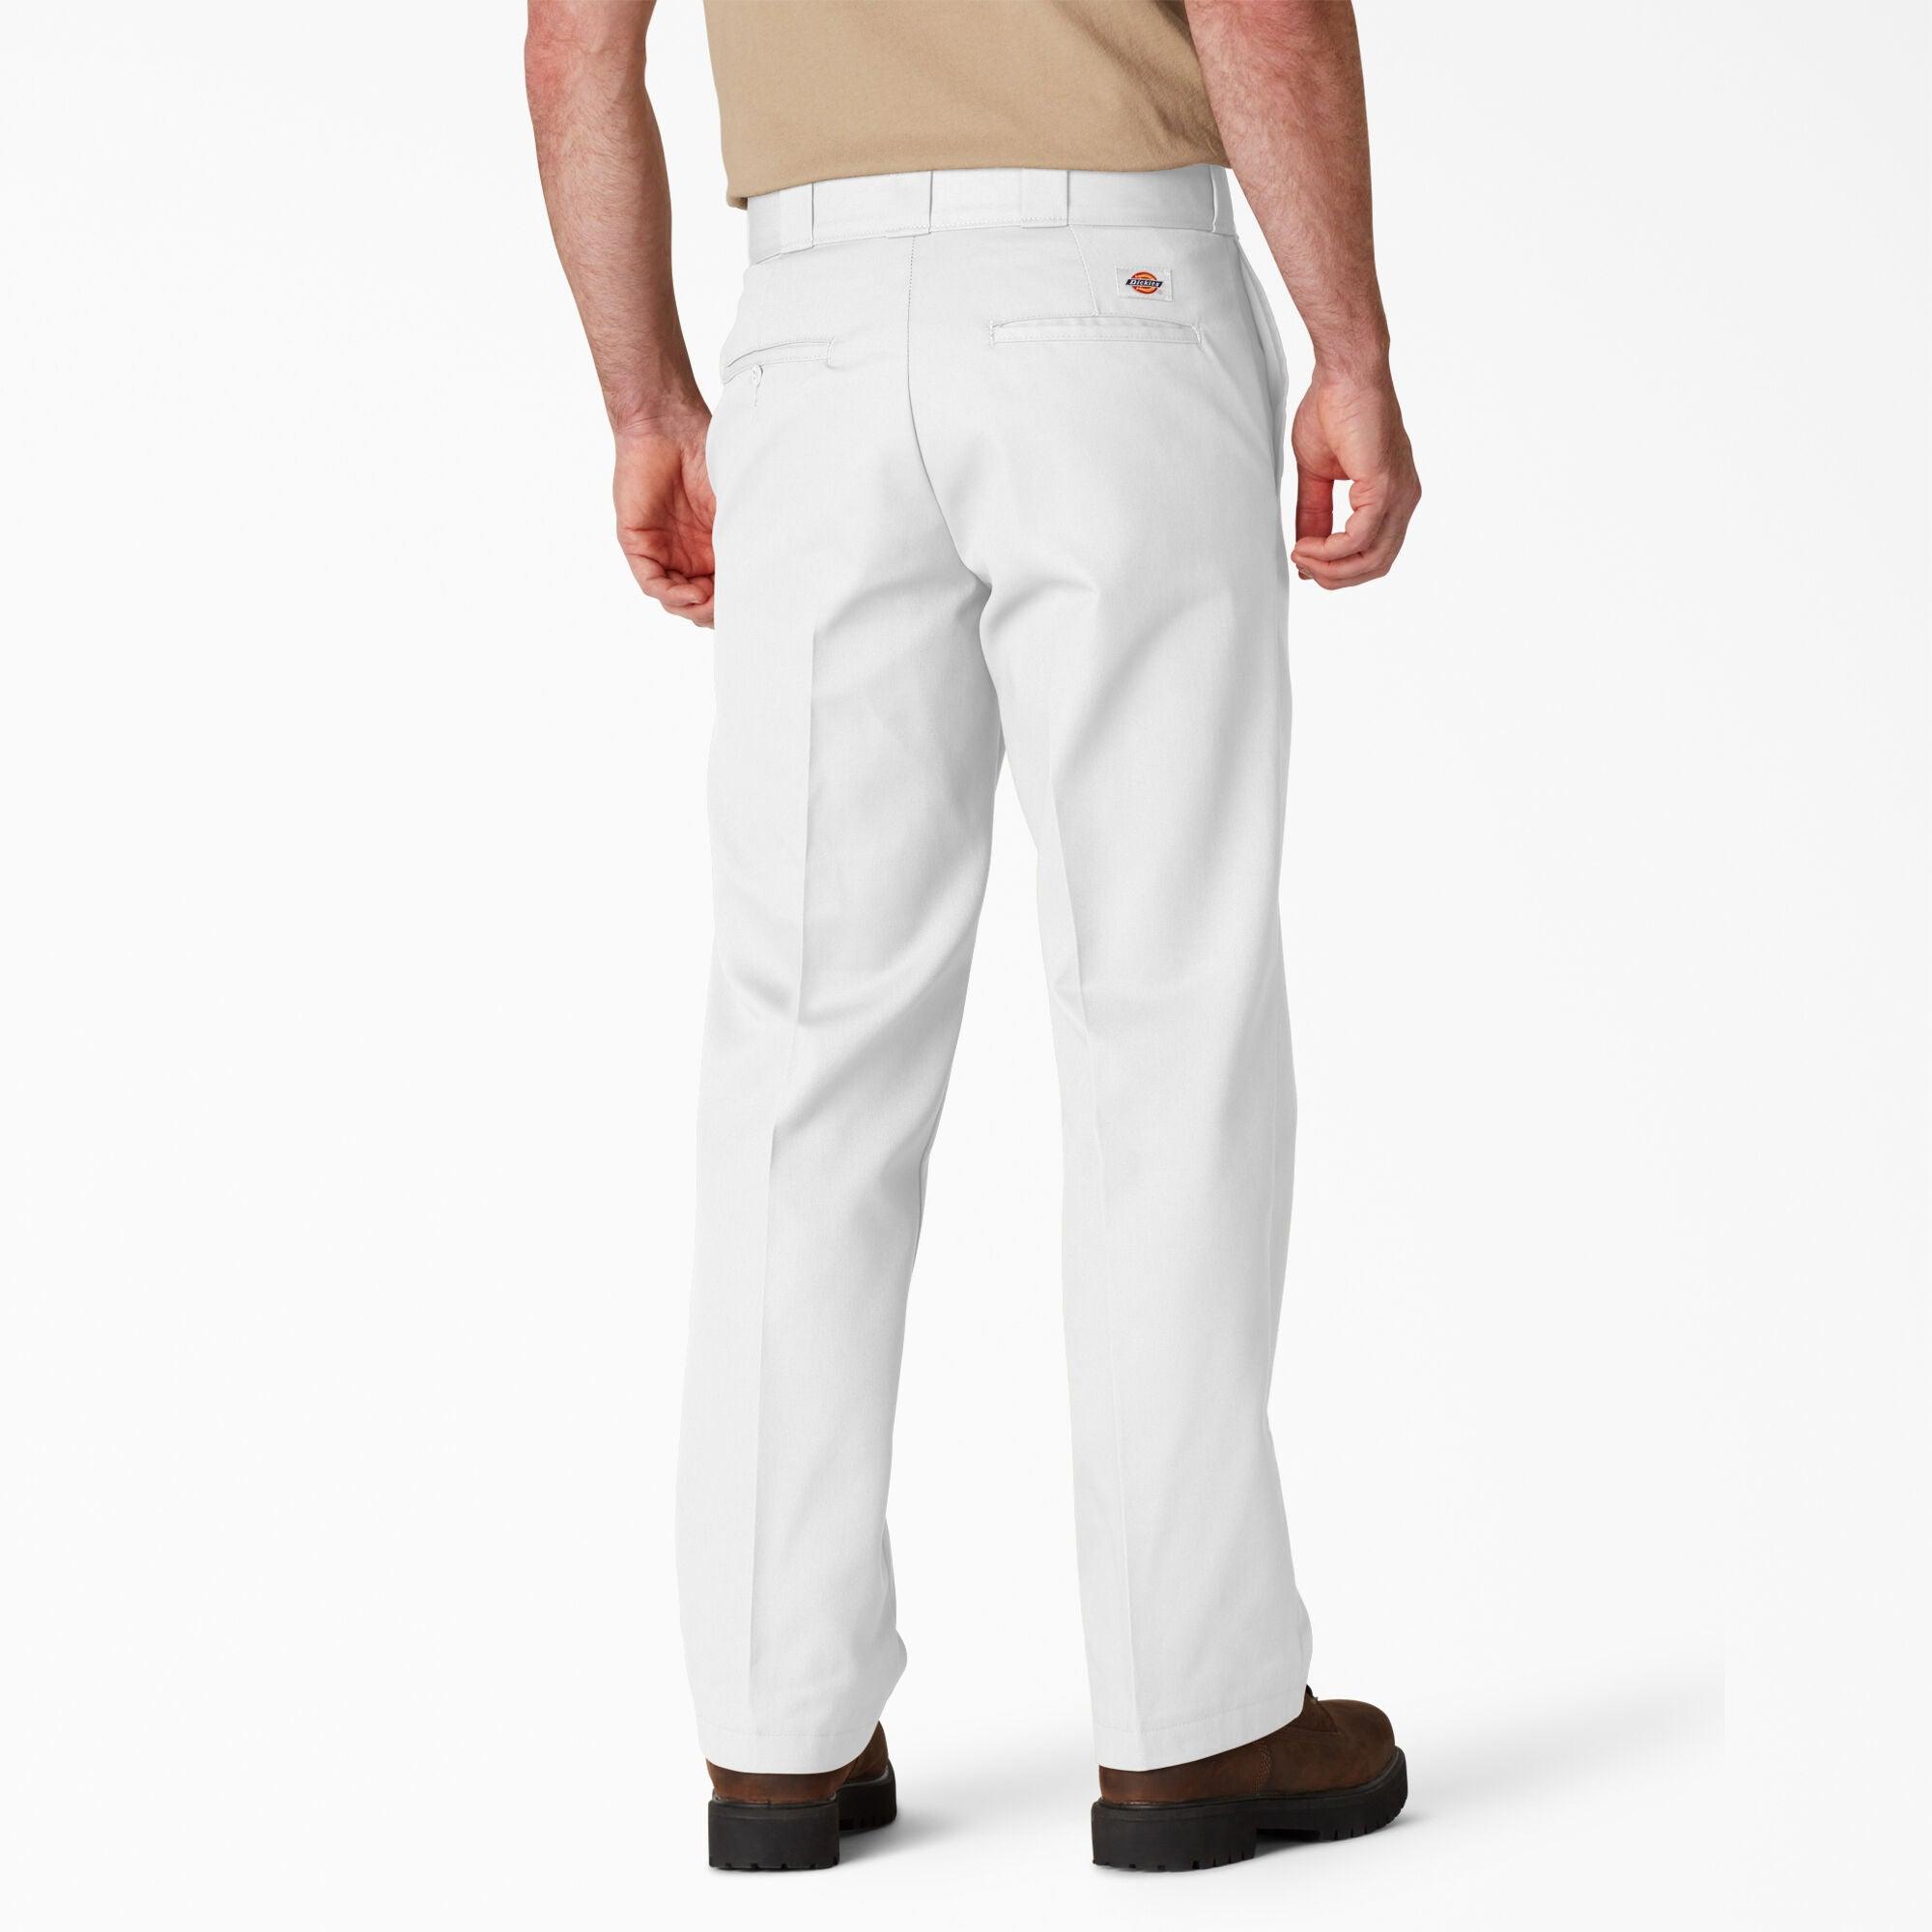 Original 874® Work Pants, White - Purpose-Built / Home of the Trades